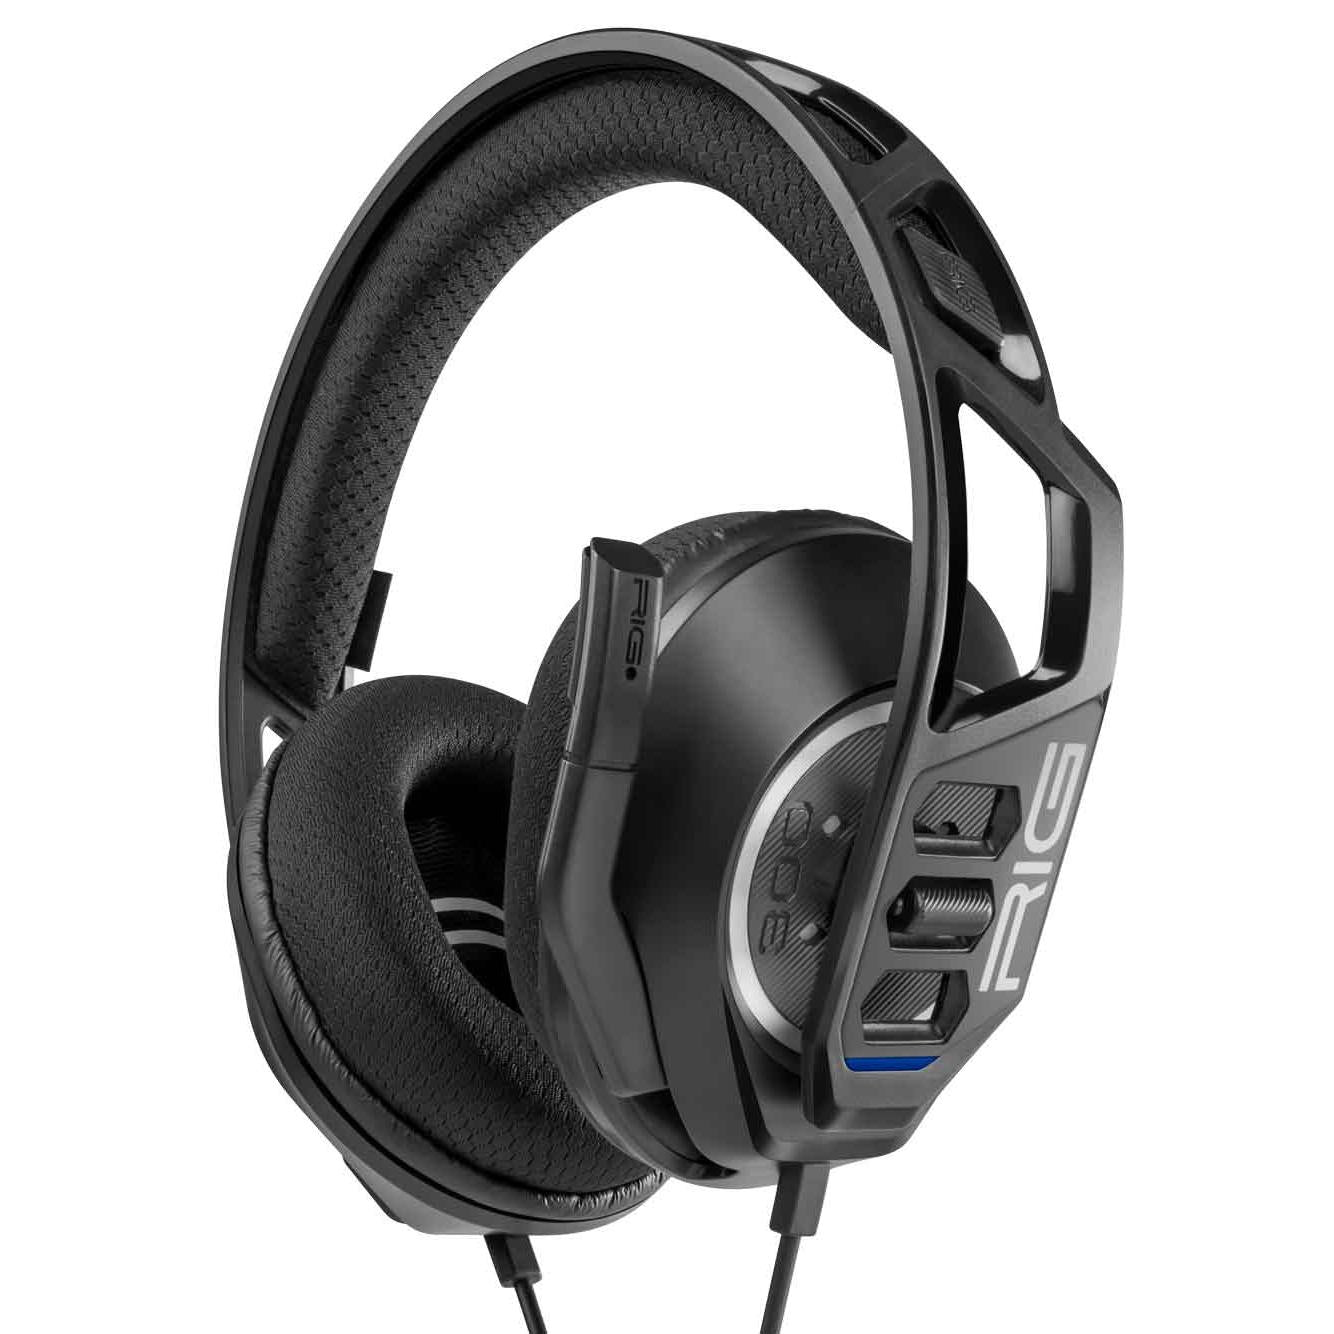 rig 300 pro hs gaming headset for playstation 5 (black)